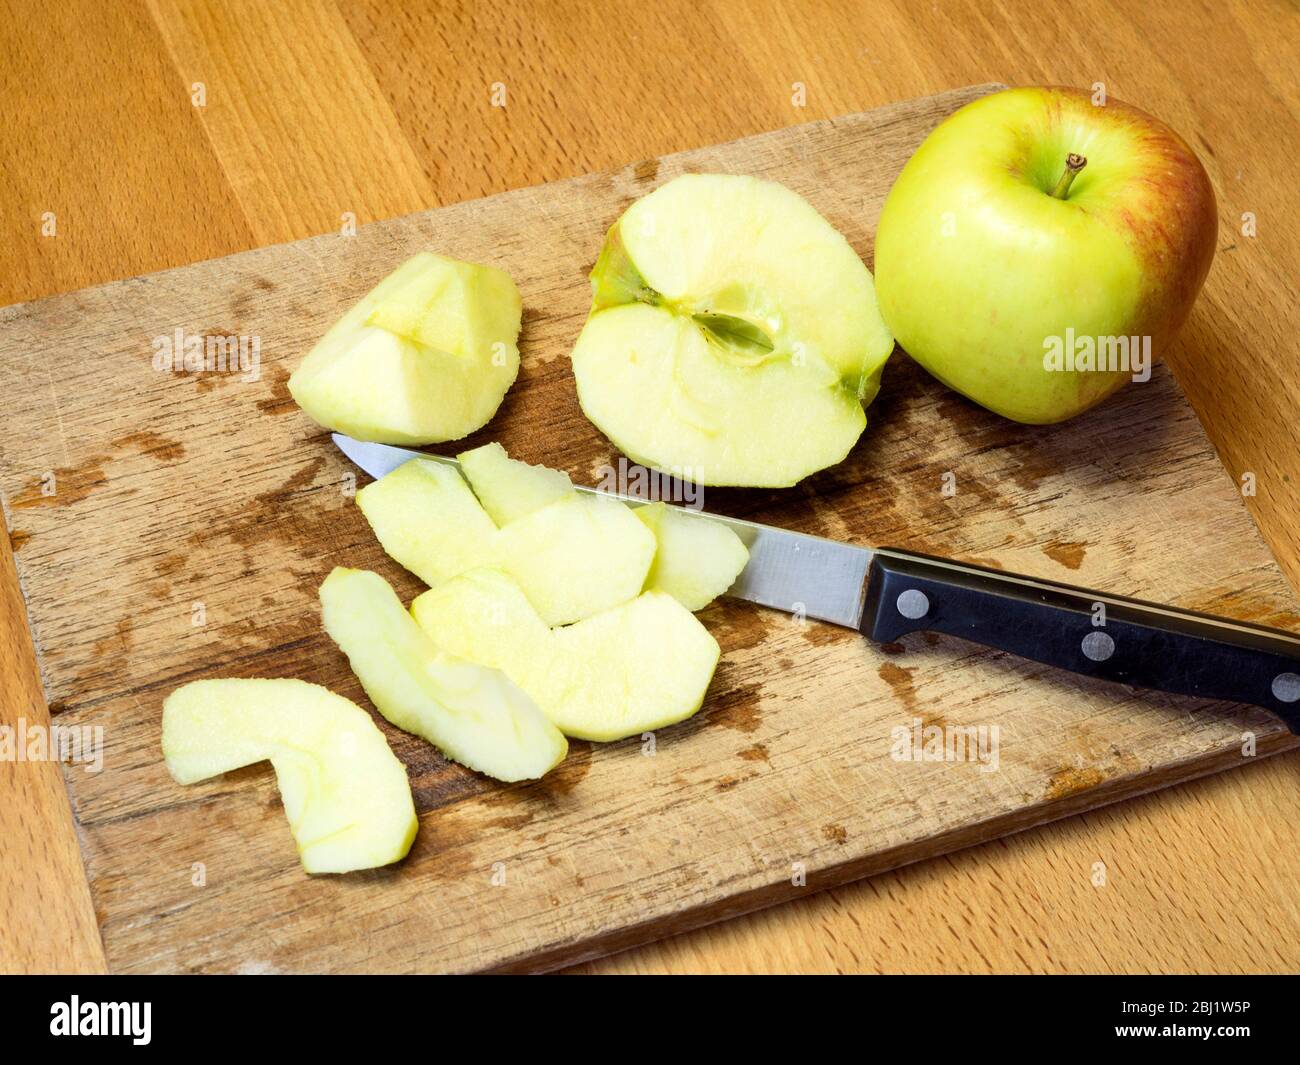 Chopping eating apples on a wooden chopping board on a kitchen table Stock Photo